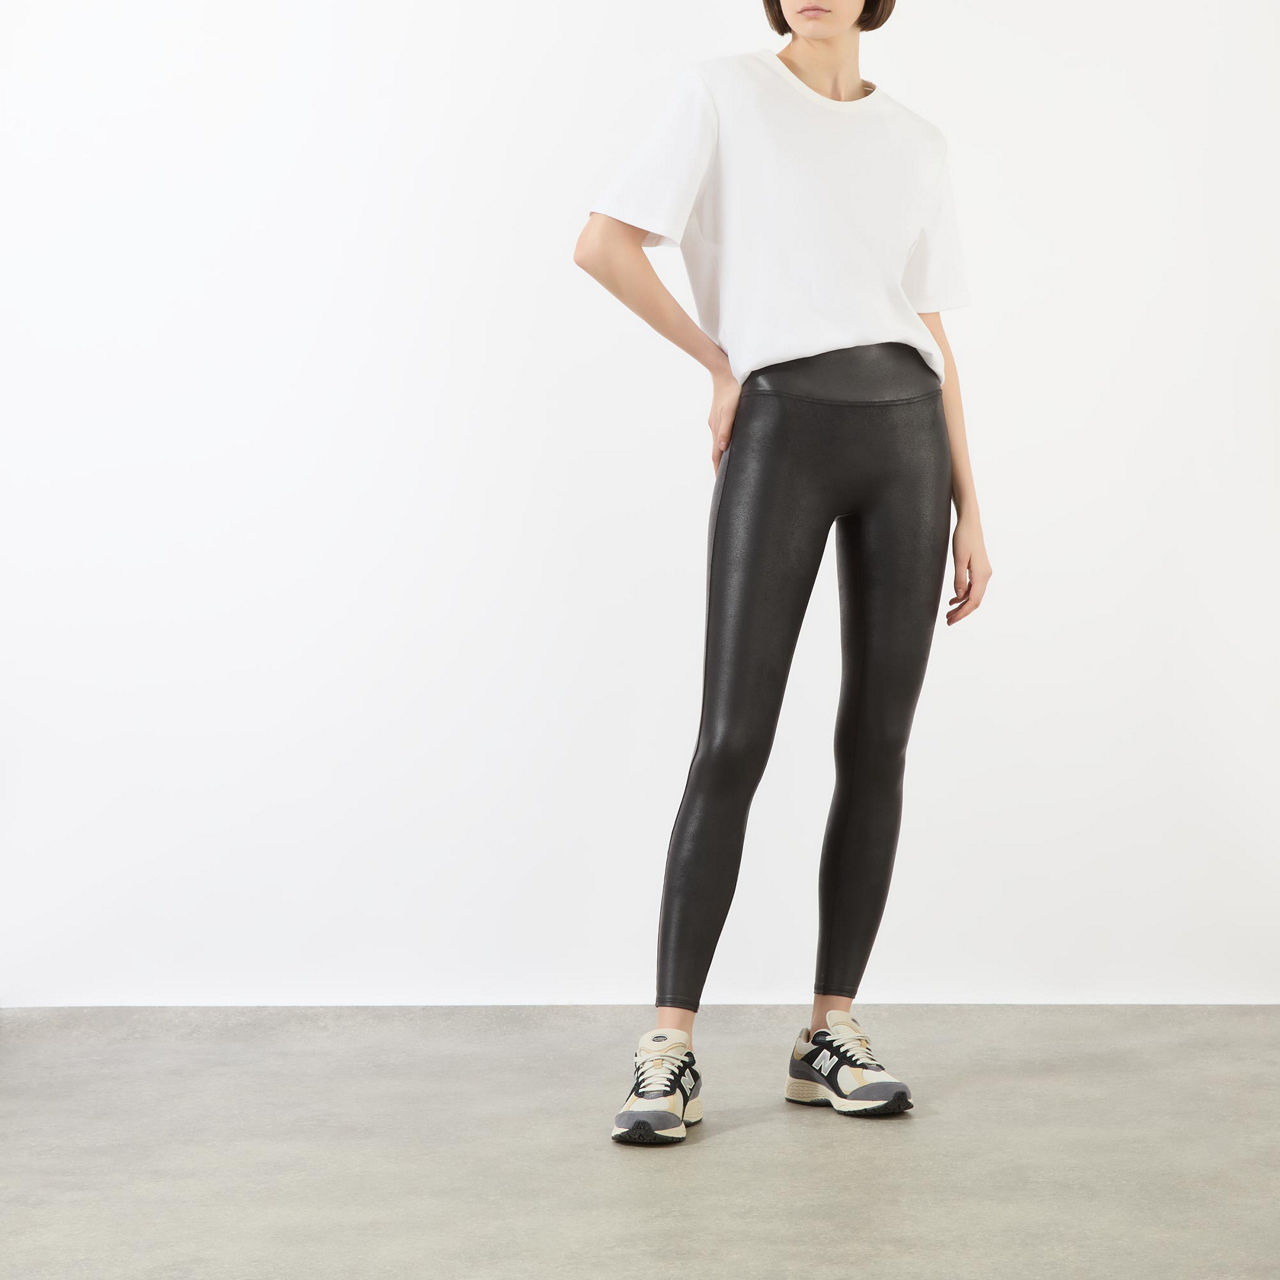 SPANX - Look at Me Now Leggings, Faux Leather Leggings, or Booty